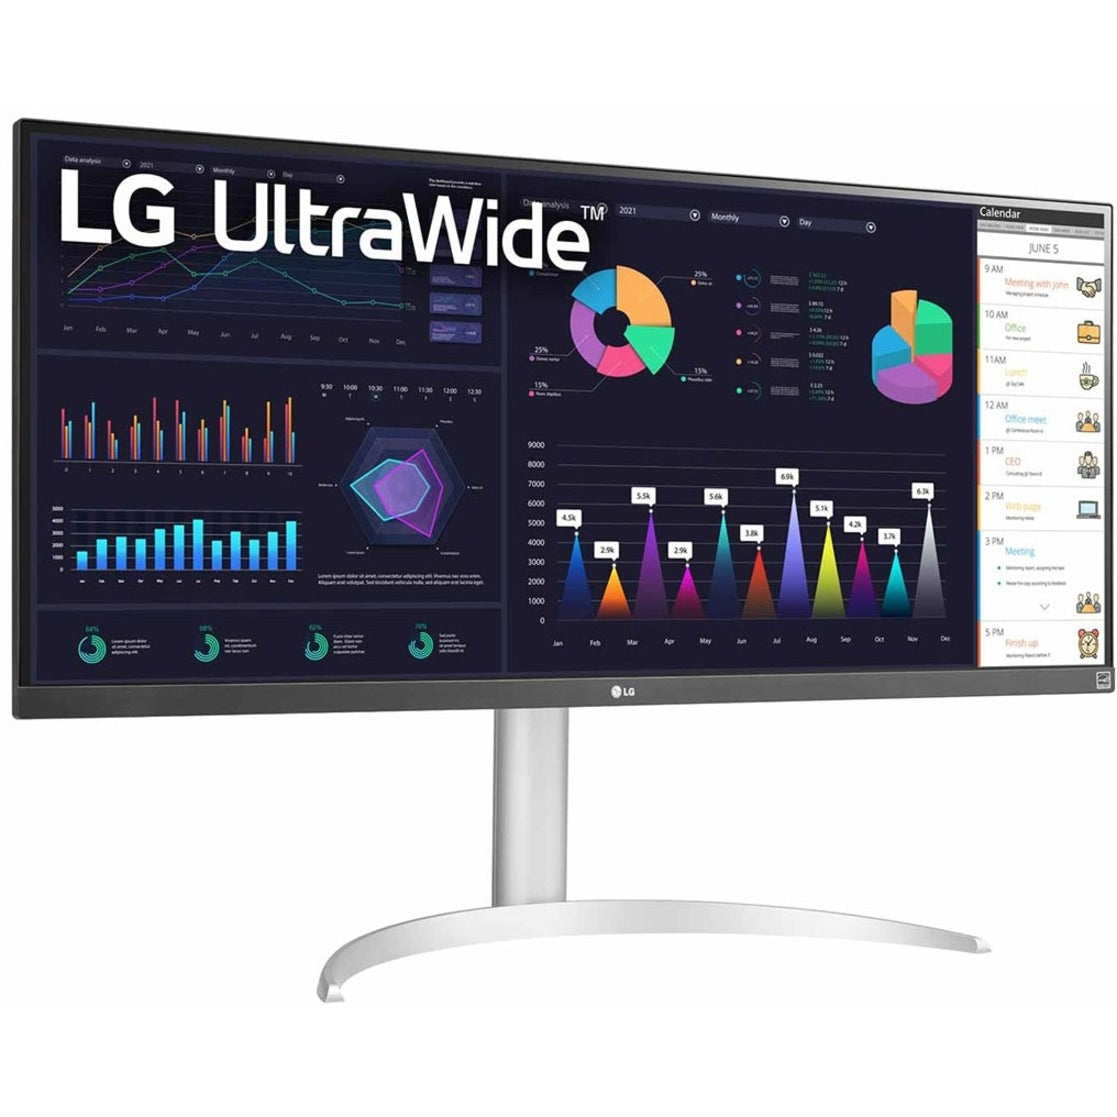 LG 34WQ650-W.AUS Ultrawide 34" LCD Monitor, 100Hz, IPS with HDR 400 Compatibility, AMD FreeSync, USB Type-C